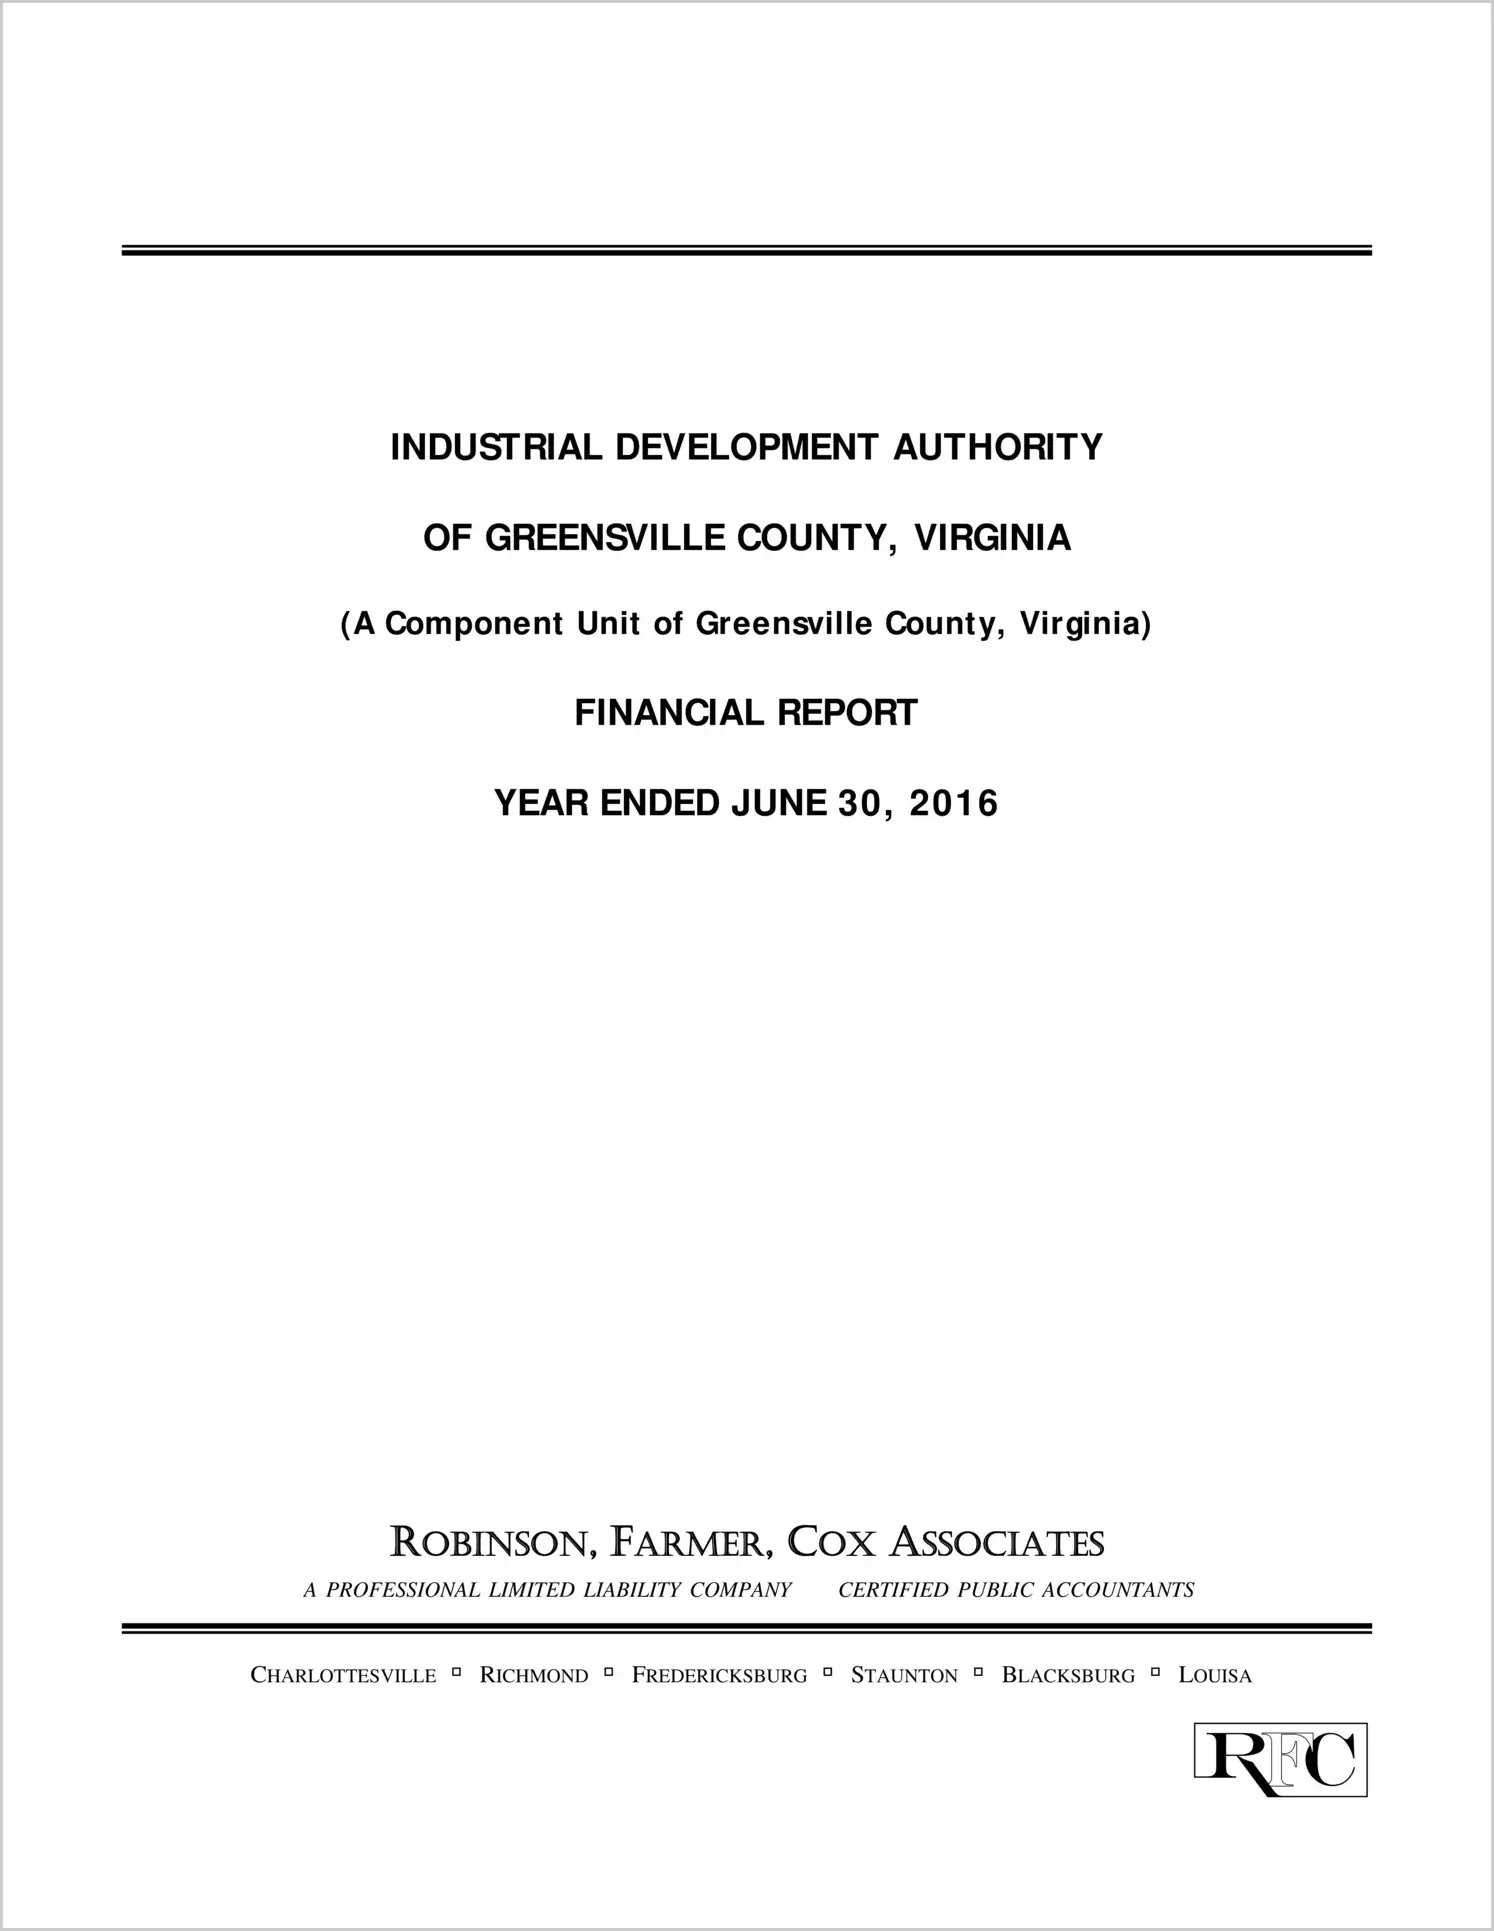 2016 ABC/Other Annual Financial Report  for Greensville Industrial Development Authority